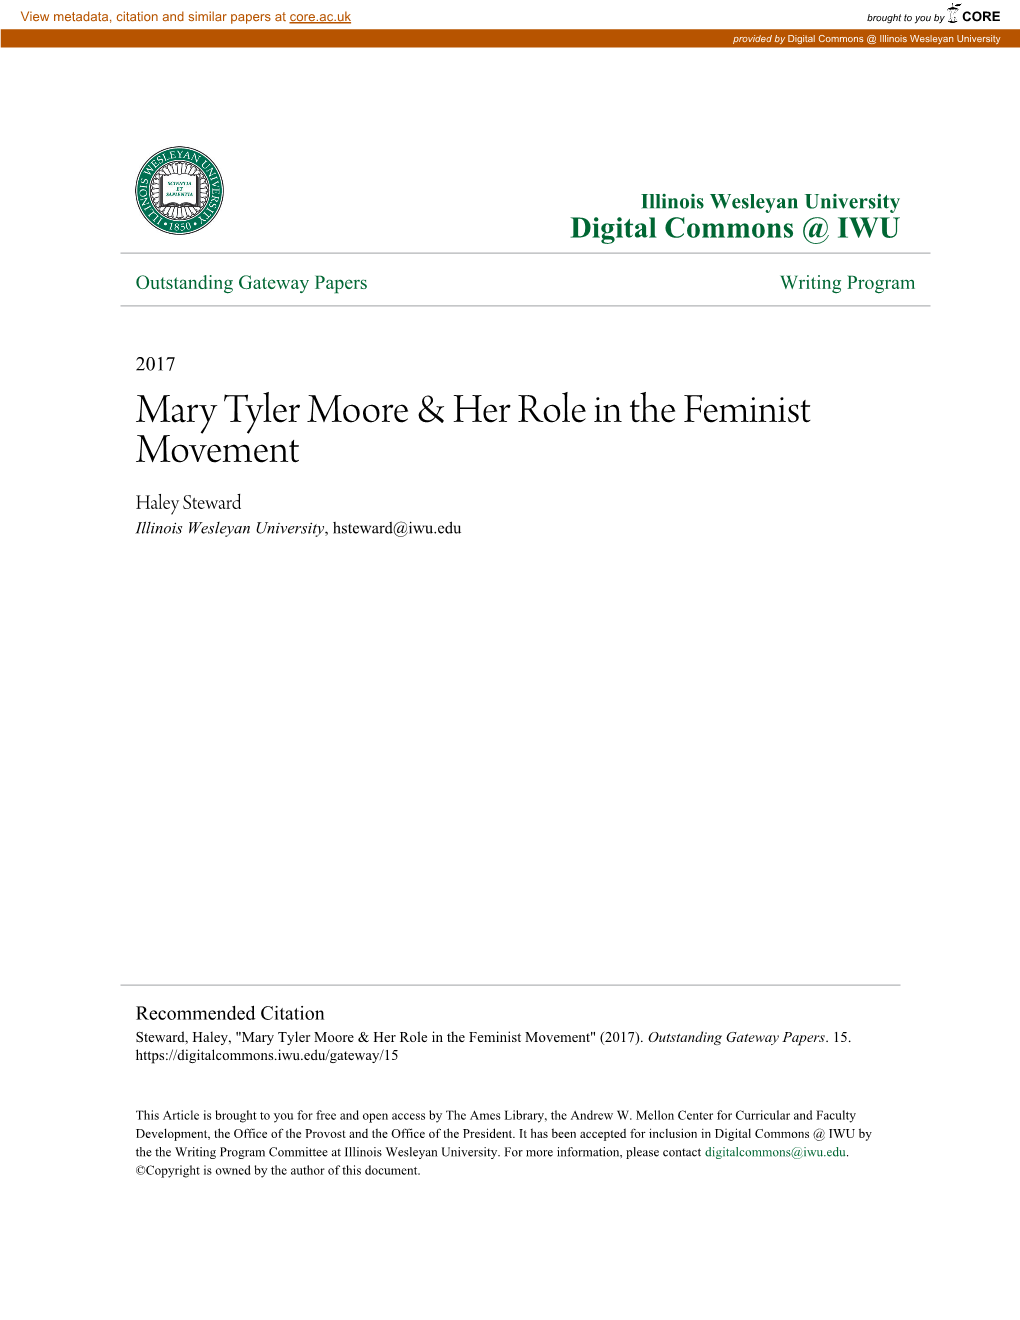 Mary Tyler Moore & Her Role in the Feminist Movement